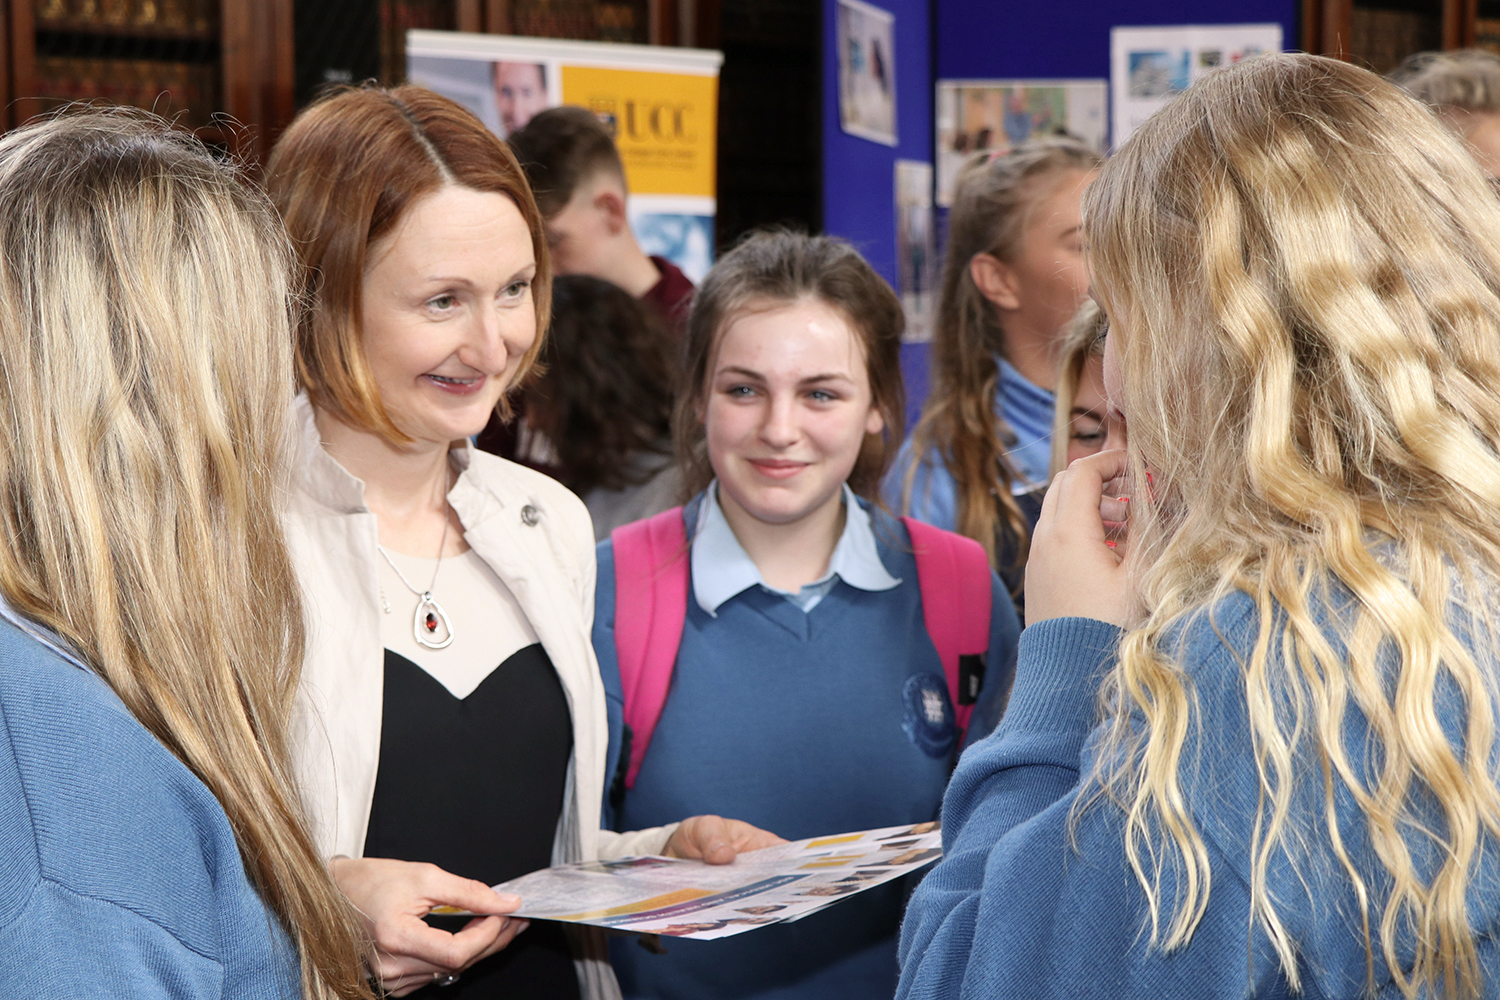  New BSc Medical and Health Sciences Degree launched at UCC Open Day